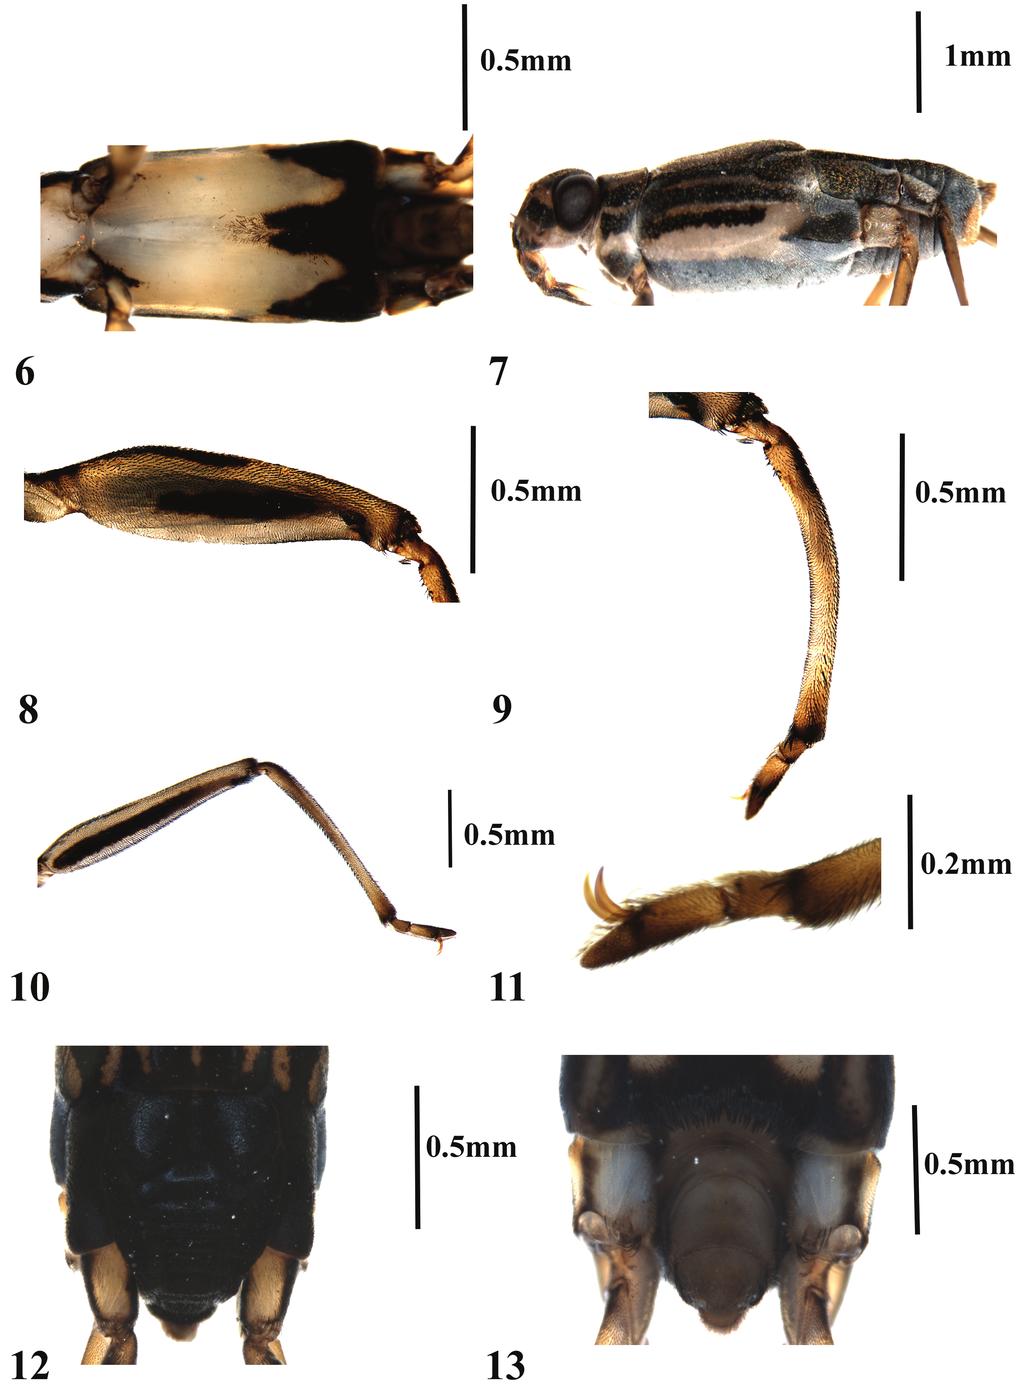 136 K. A. Subramanian et al.: A new species of Onychotrechus Kirkaldy, 1903... Figures 6 13. Onychotrechus dooarsicus sp. n. 6. Mesosternum of male, ventral view. 7. Lateral view of female. 8.